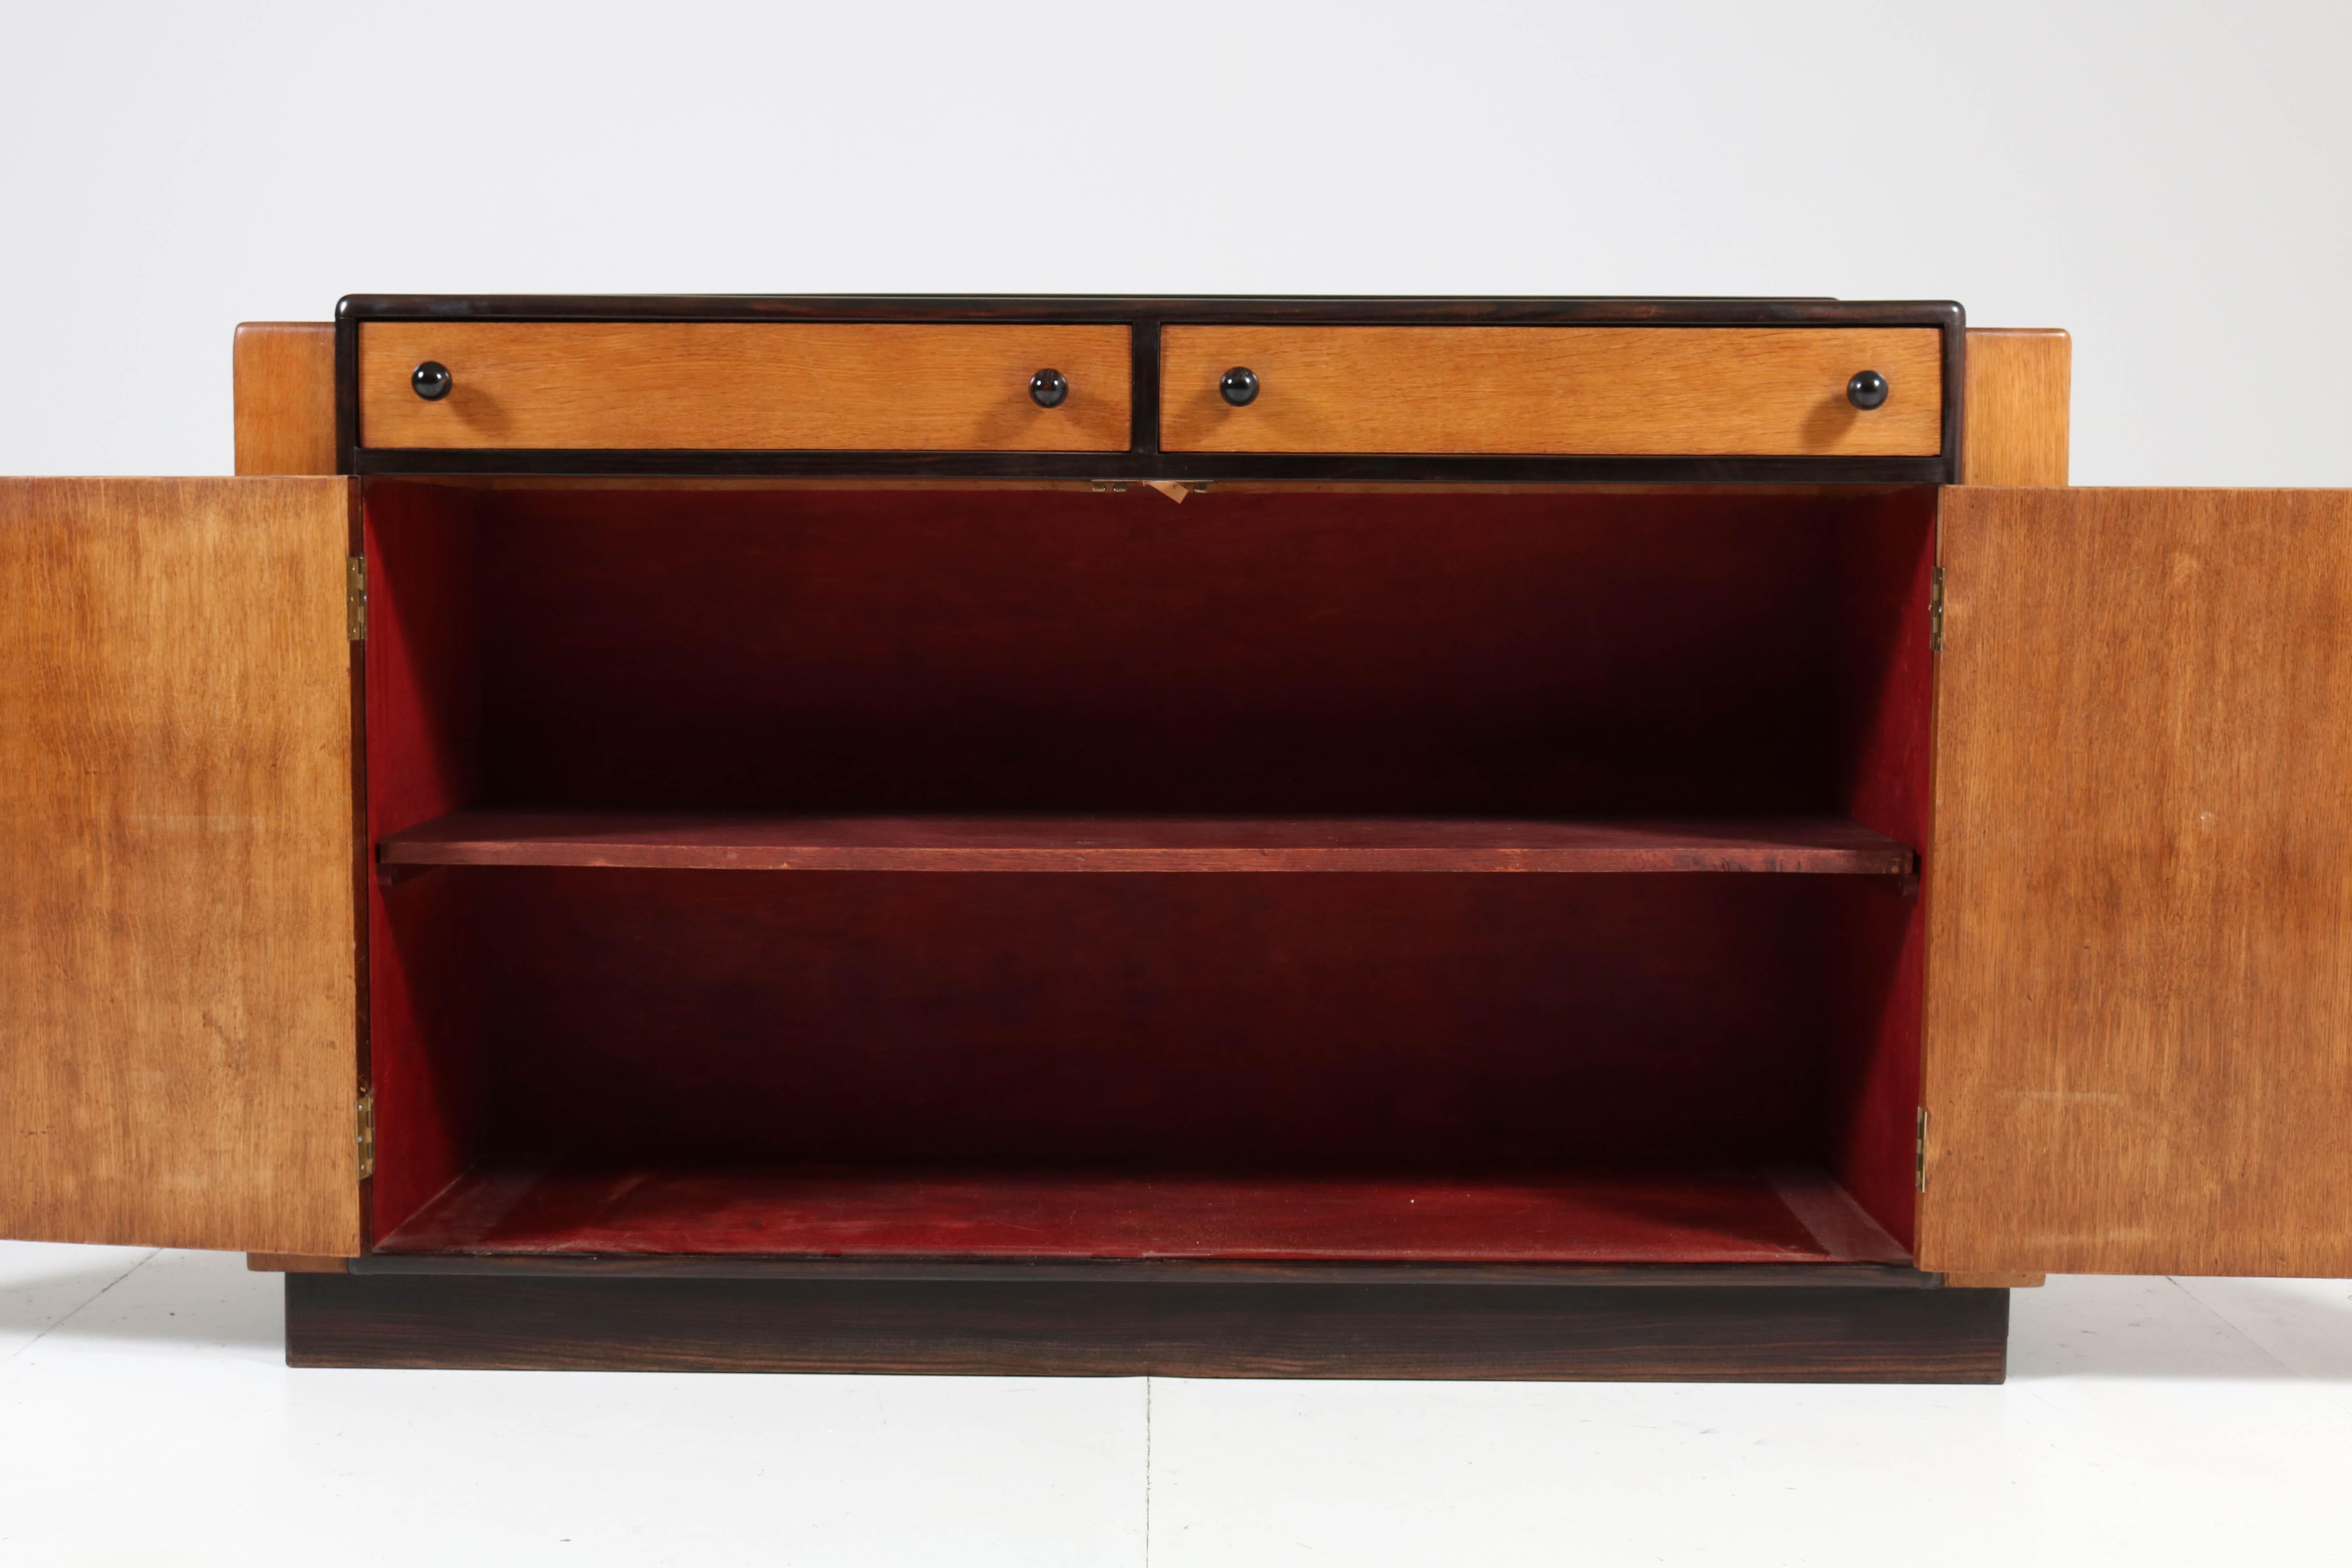 Early 20th Century Oak Art Deco Haagse School Credenza or Sideboard by P.E.L. Izeren, 1920s